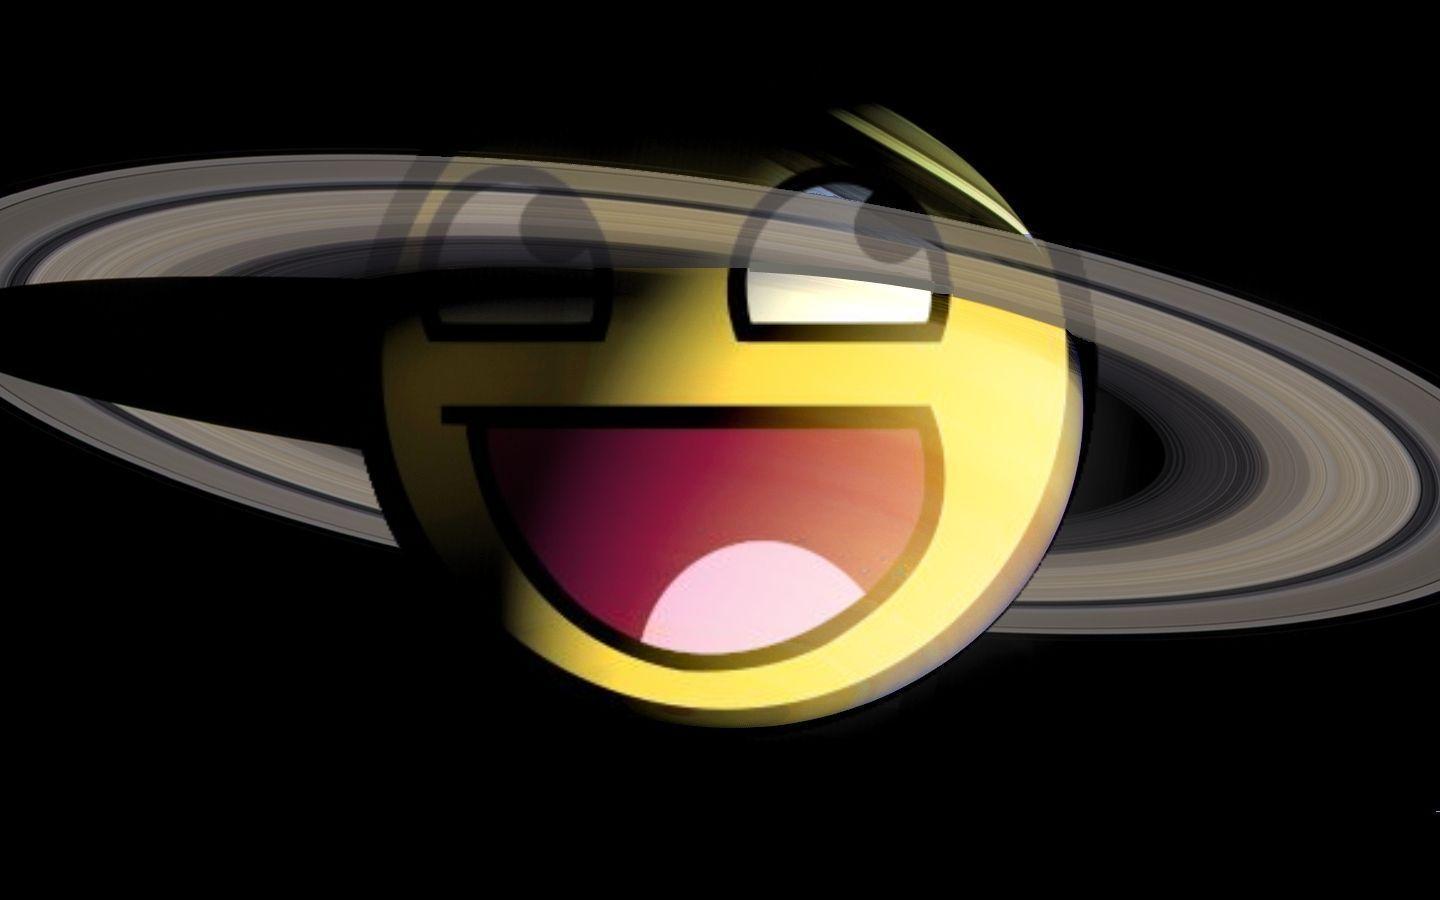 You are currently viewing Smiley-Face Screensaver Face planet awesome epic cool smiley saturn planets smileys faces space wallpapers happy emoji funny stuff studios random im cute